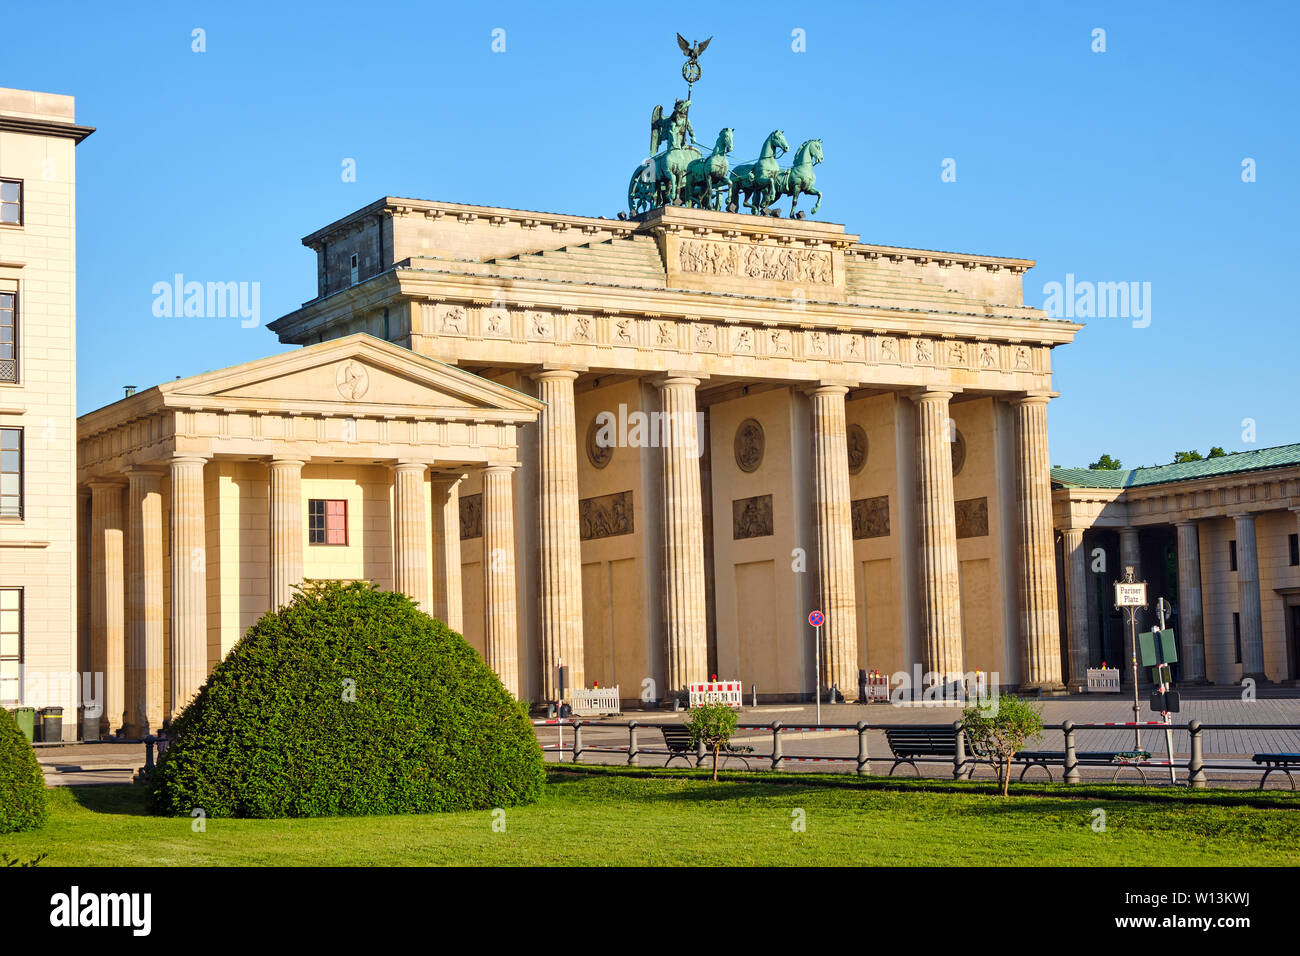 The famous Brandenburg Gate in Berlin early in the morning Stock Photo